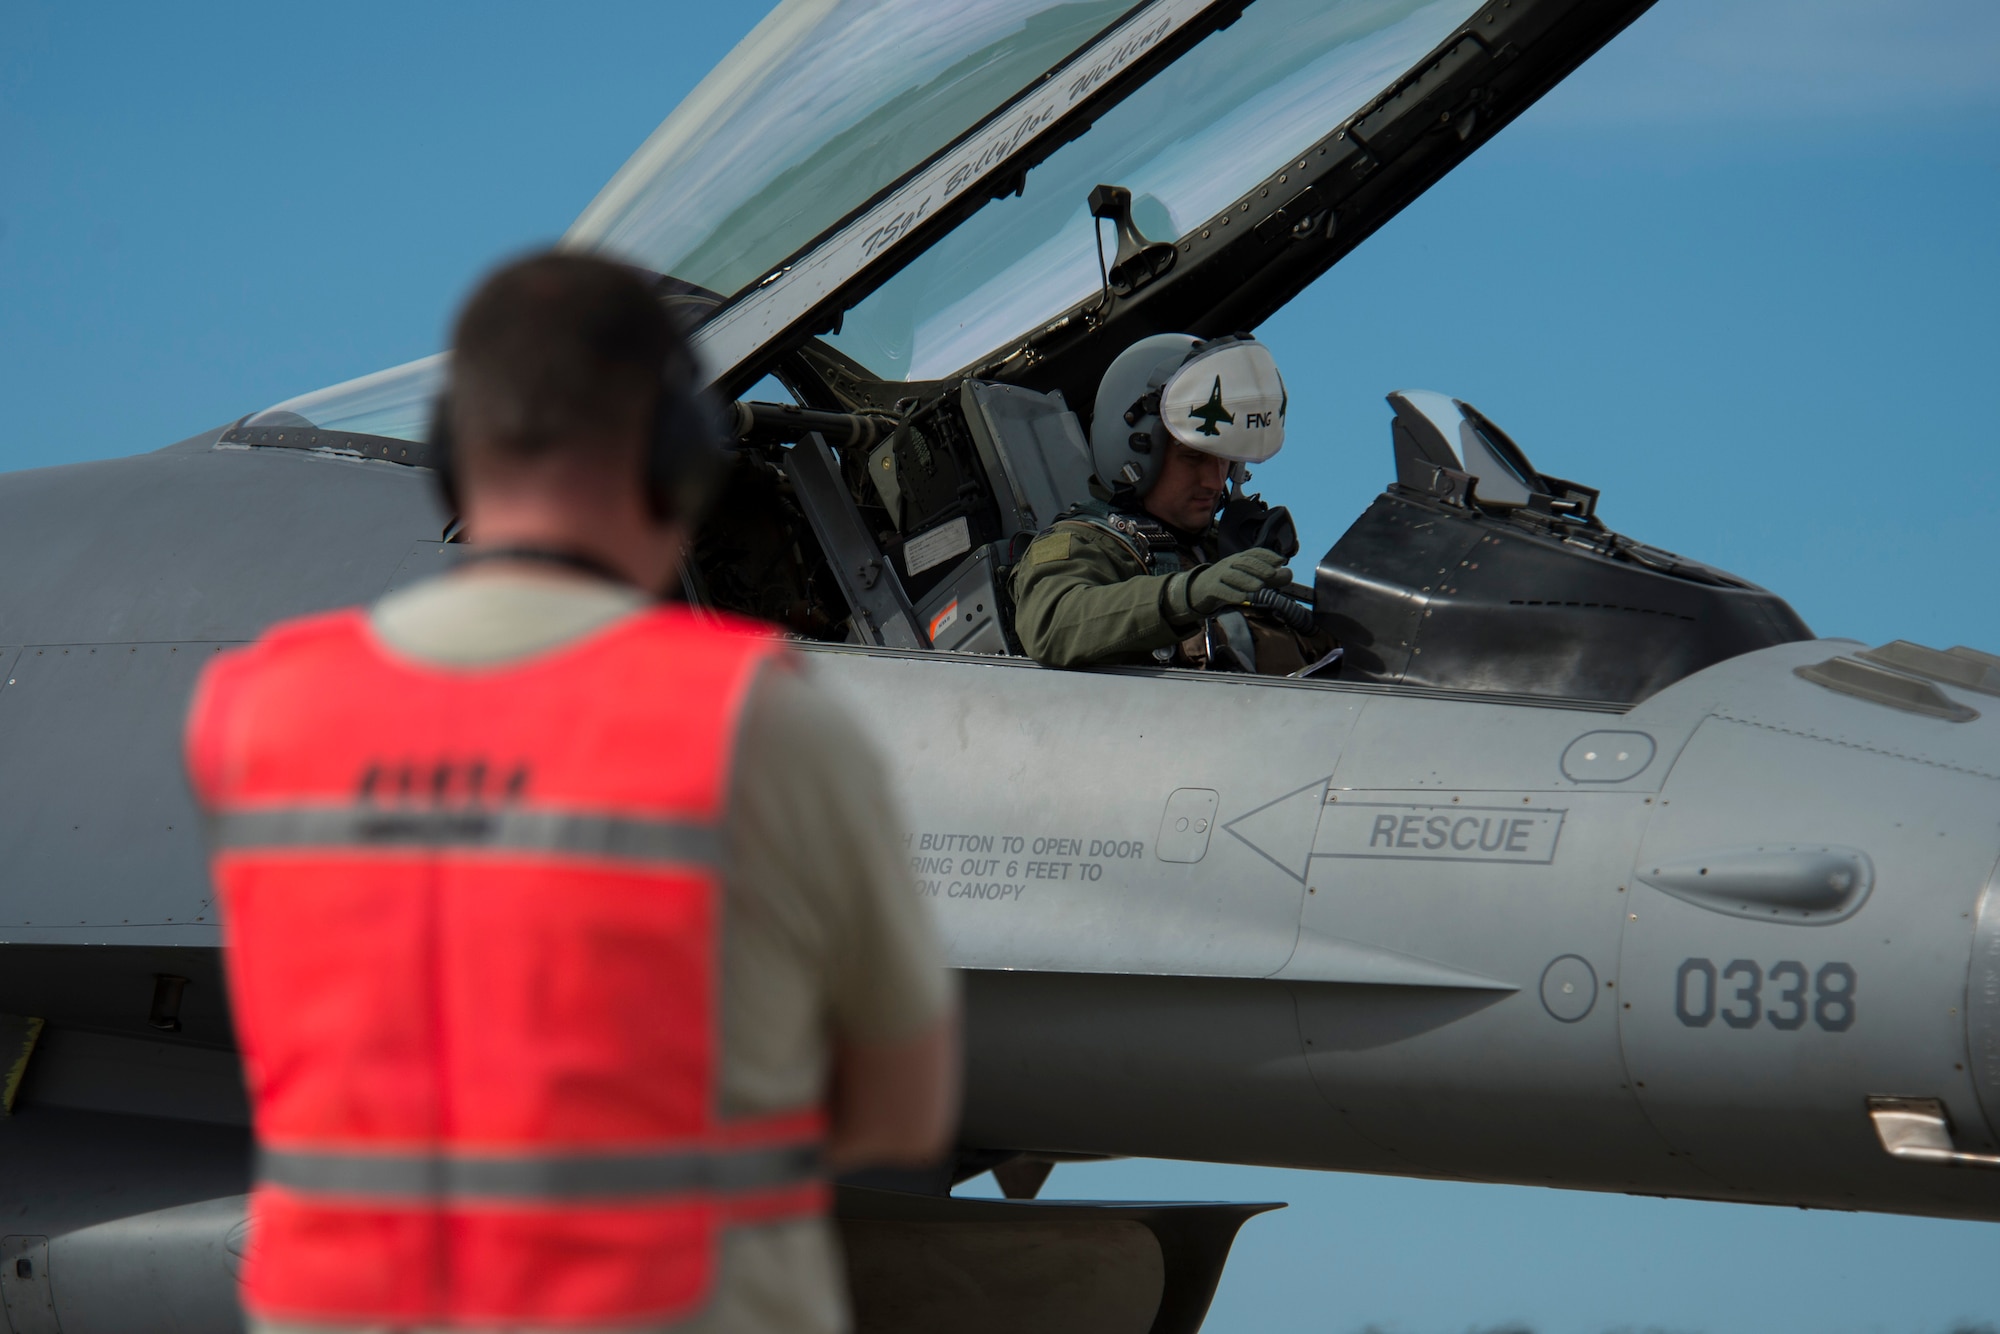 BEJA AIR BASE, Portugal - An F-16 Fighting Falcon fighter aircraft pilot from the 480th Fighter Squadron, Spangdahlem Air Base, Germany, conducts pre-flight checks before take off at Beja Air Base, Portugal, Oct. 21, 2015. The 480th FS is here in support of Exercise Trident Juncture 2015, a multinational exercise consisting of more than 30,000  troops from more than 30 nations. The exercise is geared toward demonstrating ability to respond on a large scale to a crisis scenario. (U.S. Air Force photo by Airman 1st Class Luke Kitterman/Released)